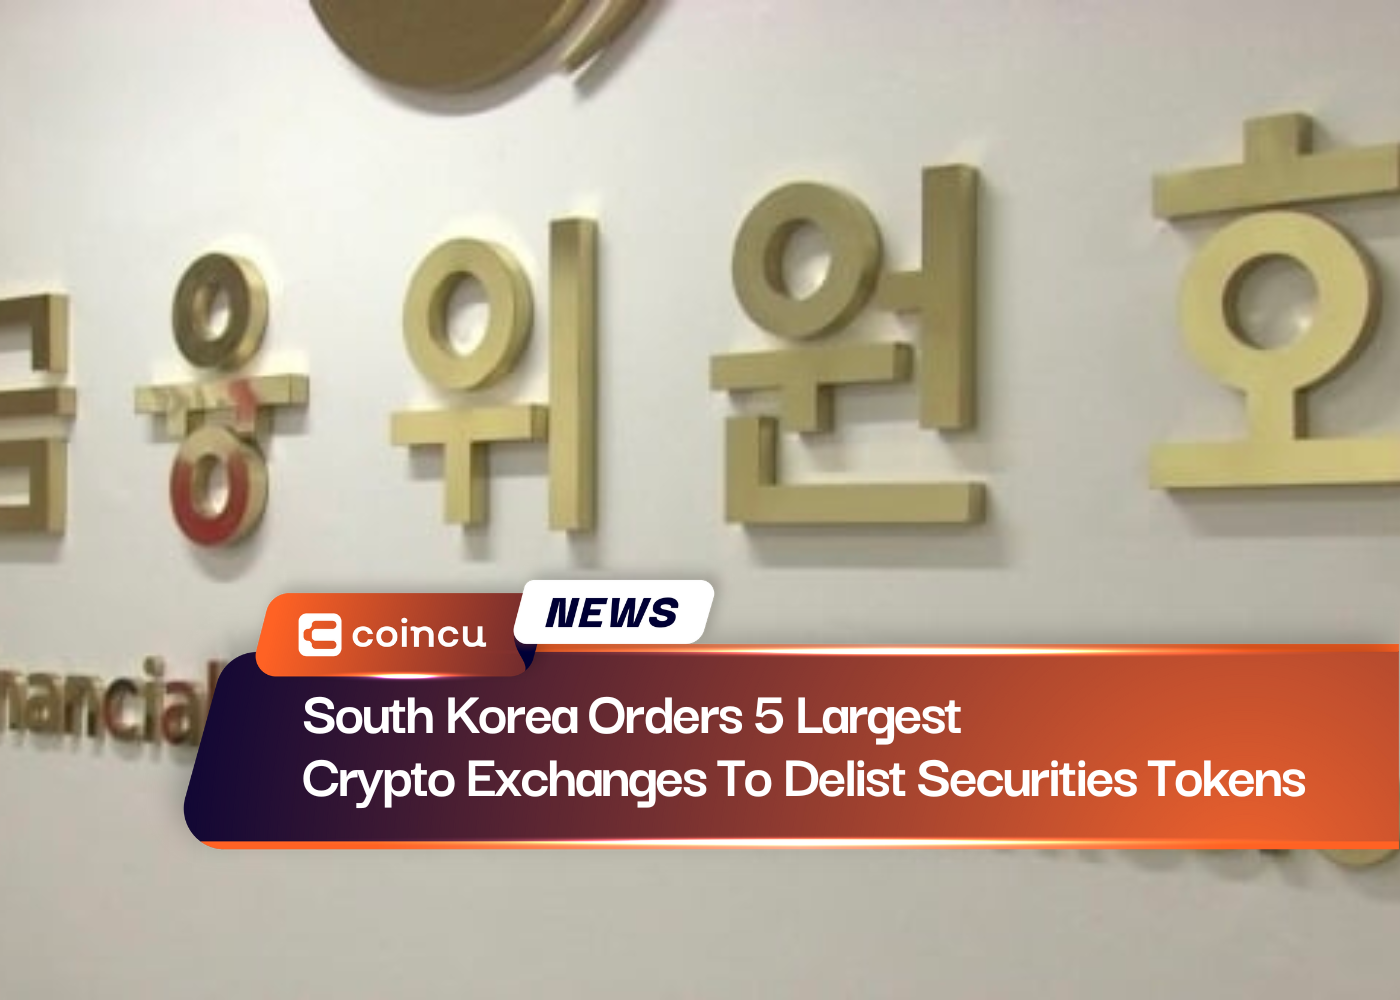 South Korea Orders 5 Largest Crypto Exchanges To Delist Securities Tokens